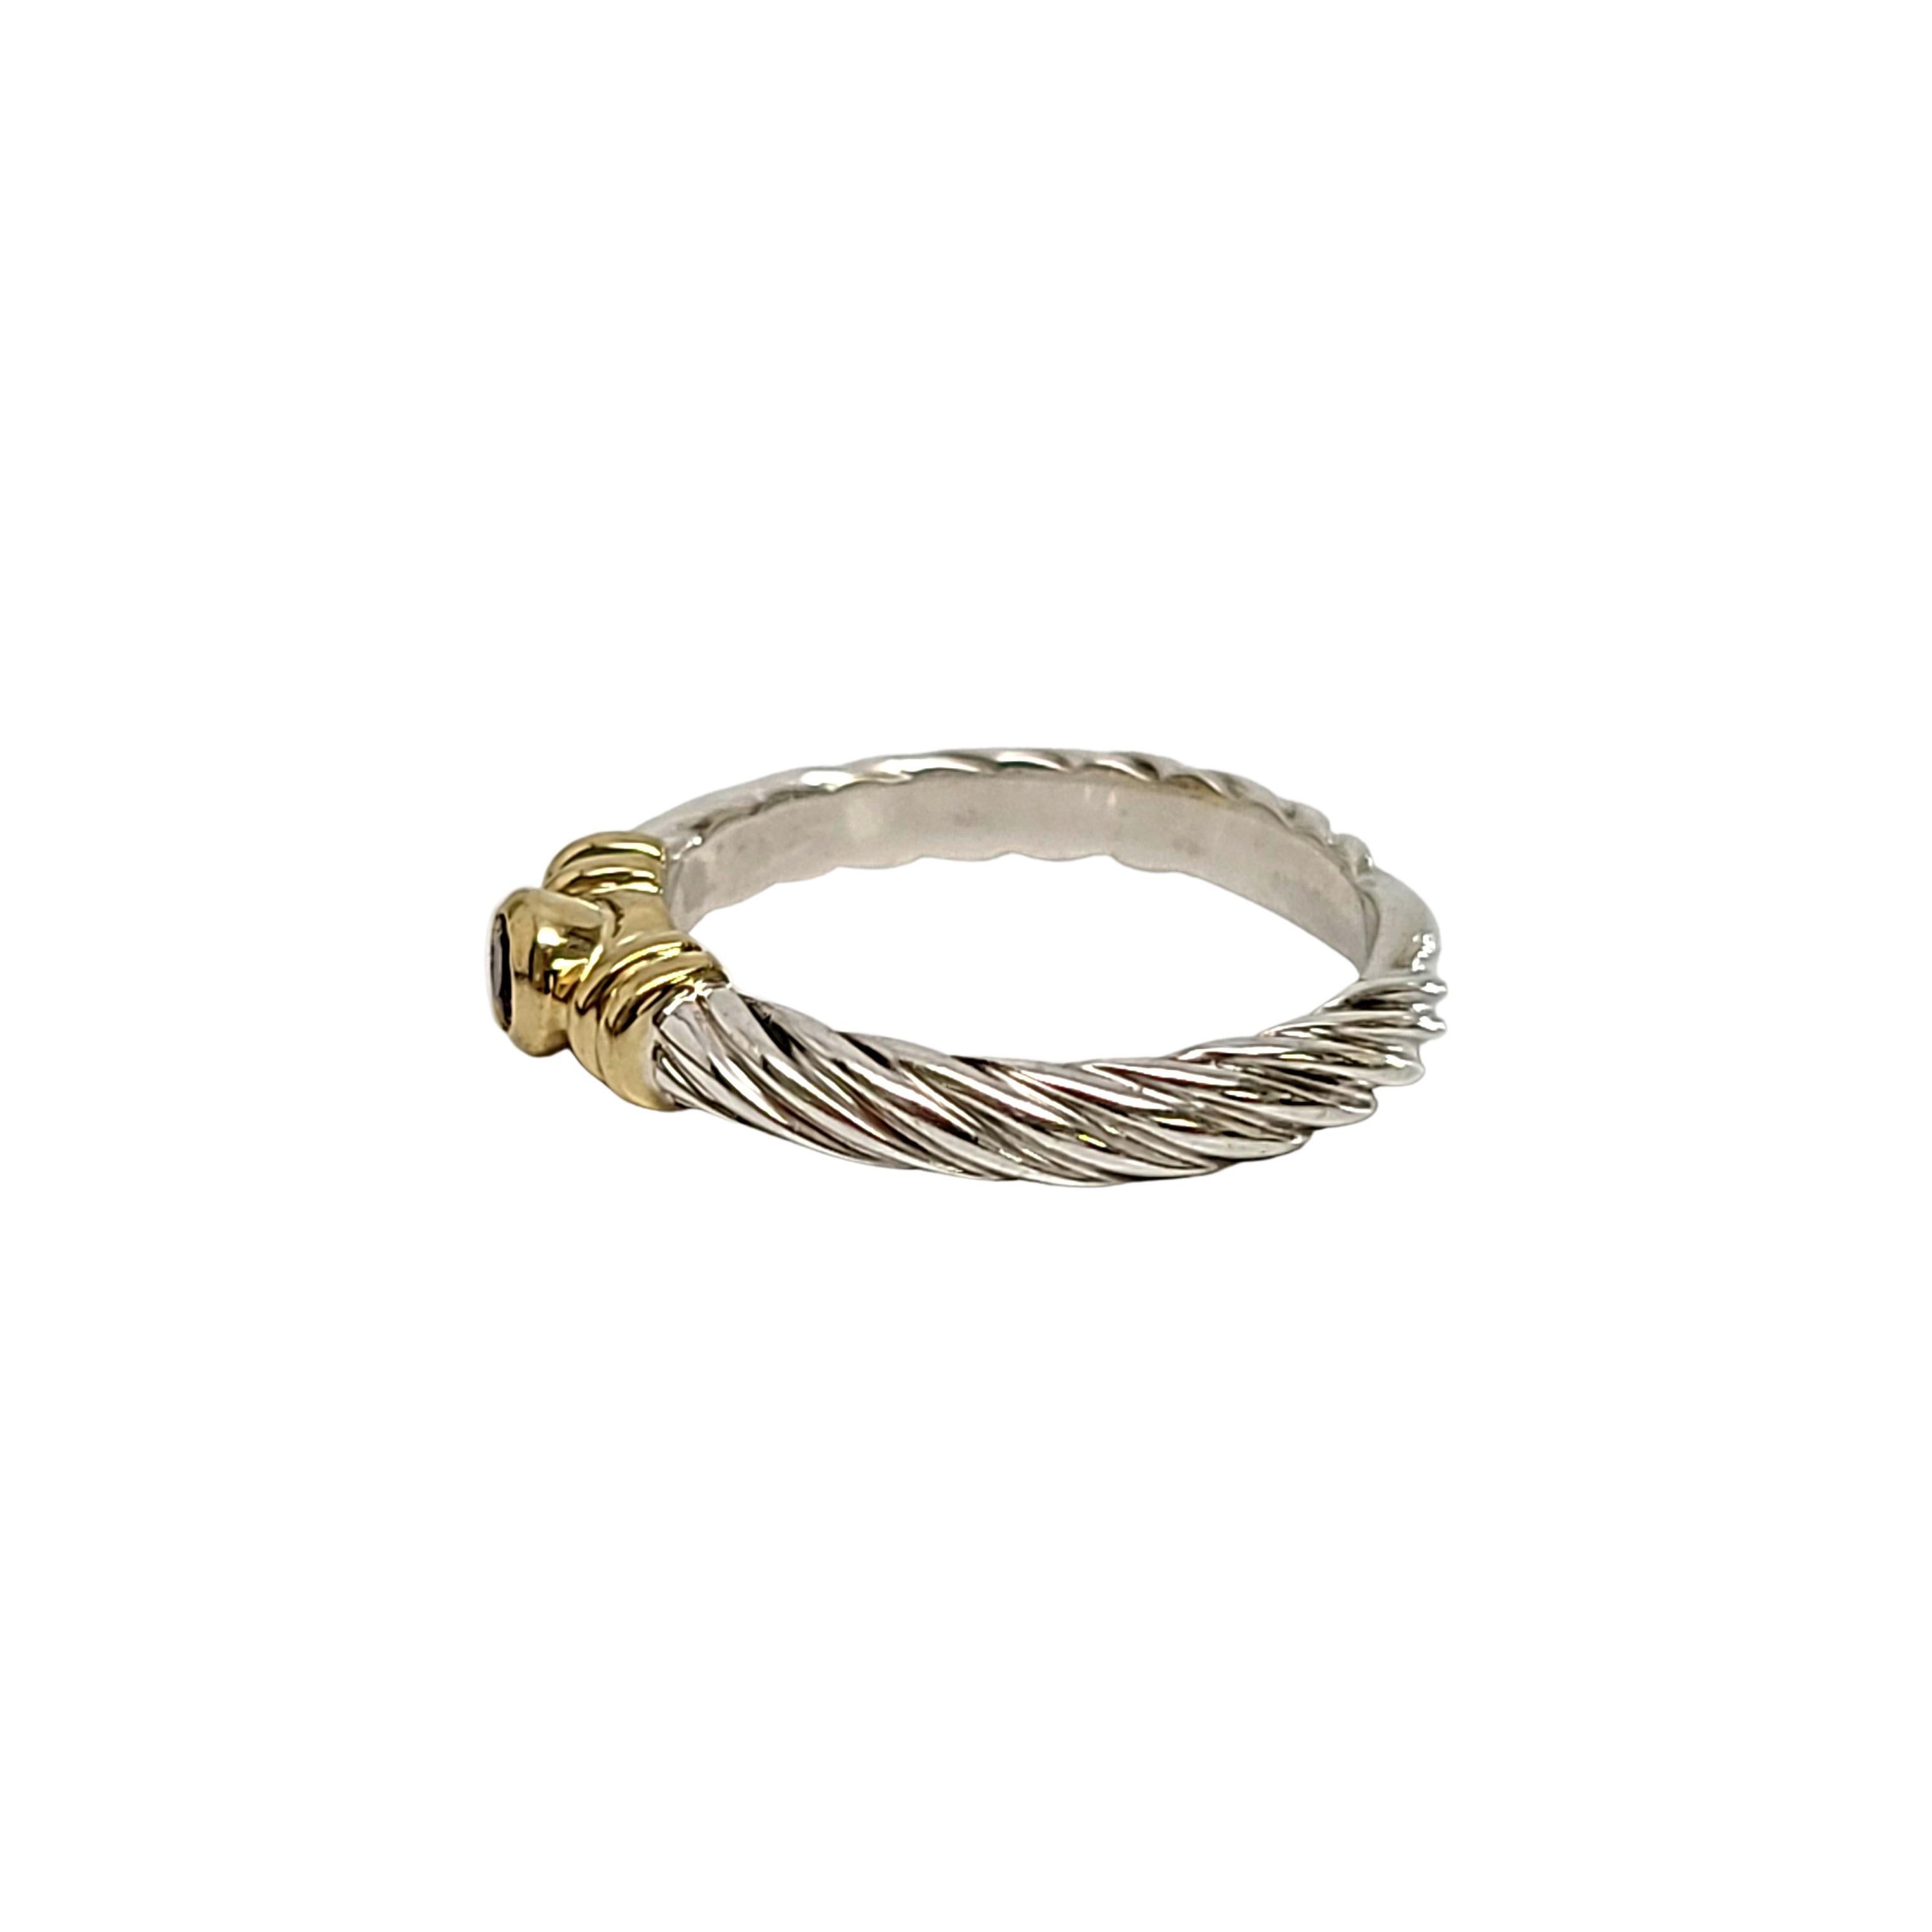 Sterling silver and 18K yellow gold amethyst pinky ring by David Yurman.

Size 4

Features a small round faceted amethyst surrounded by an 18K yellow gold bezel and twisted cable design band.

Measures 2.5mm wide band. Stone measures approx 2.5mm in